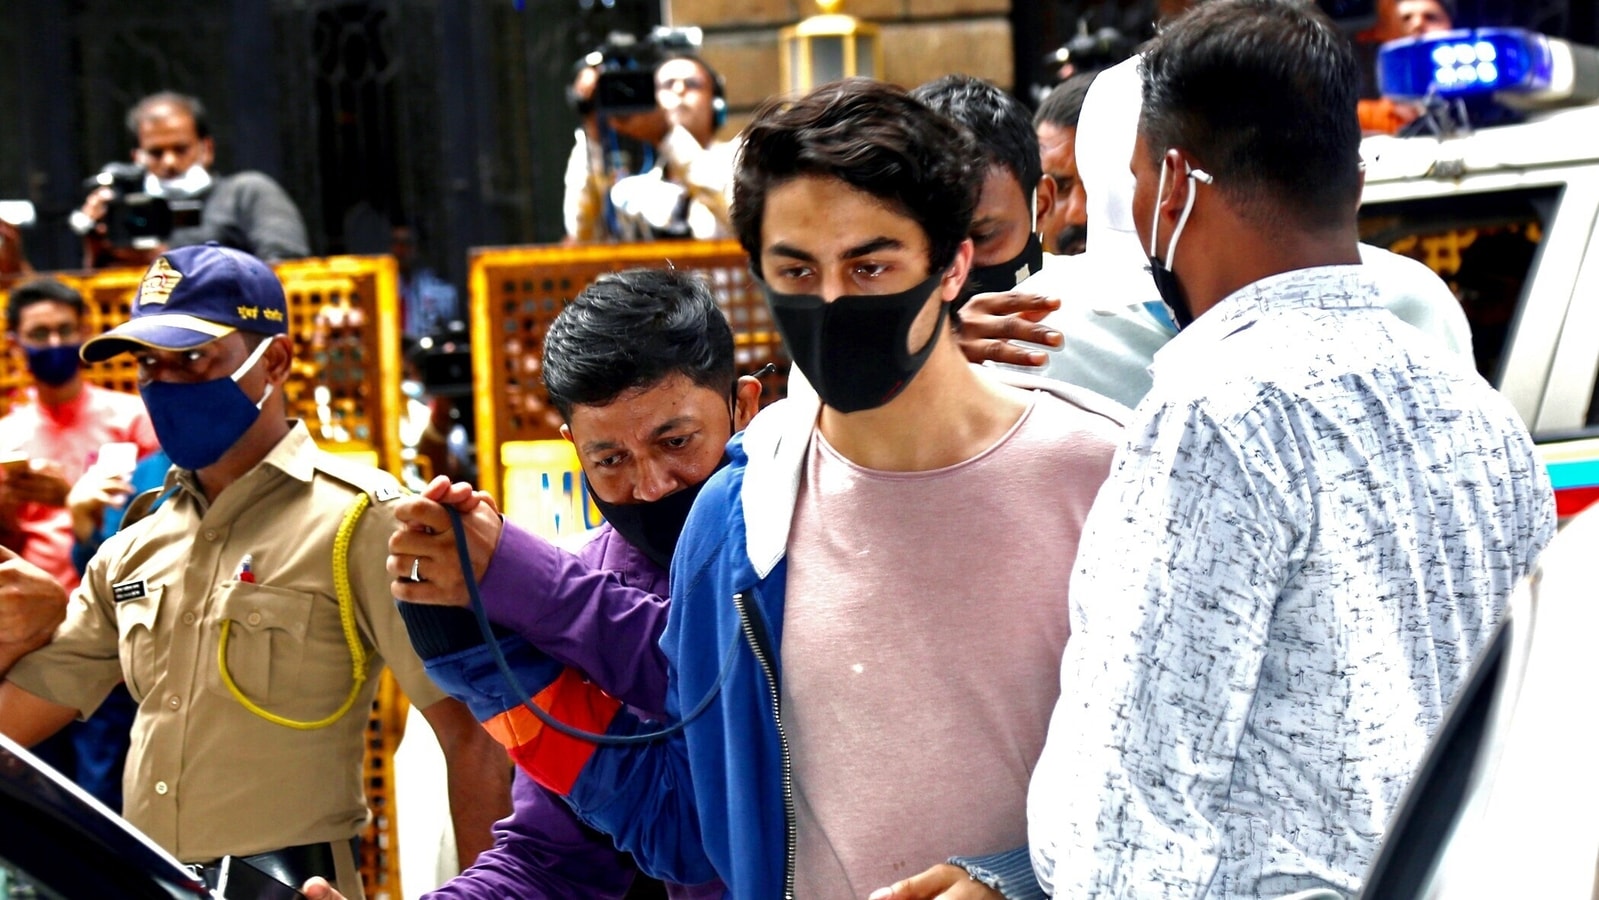 Aryan Khan's NCB custody ends today, will seek bail in drugs case | Latest  News India - Hindustan Times